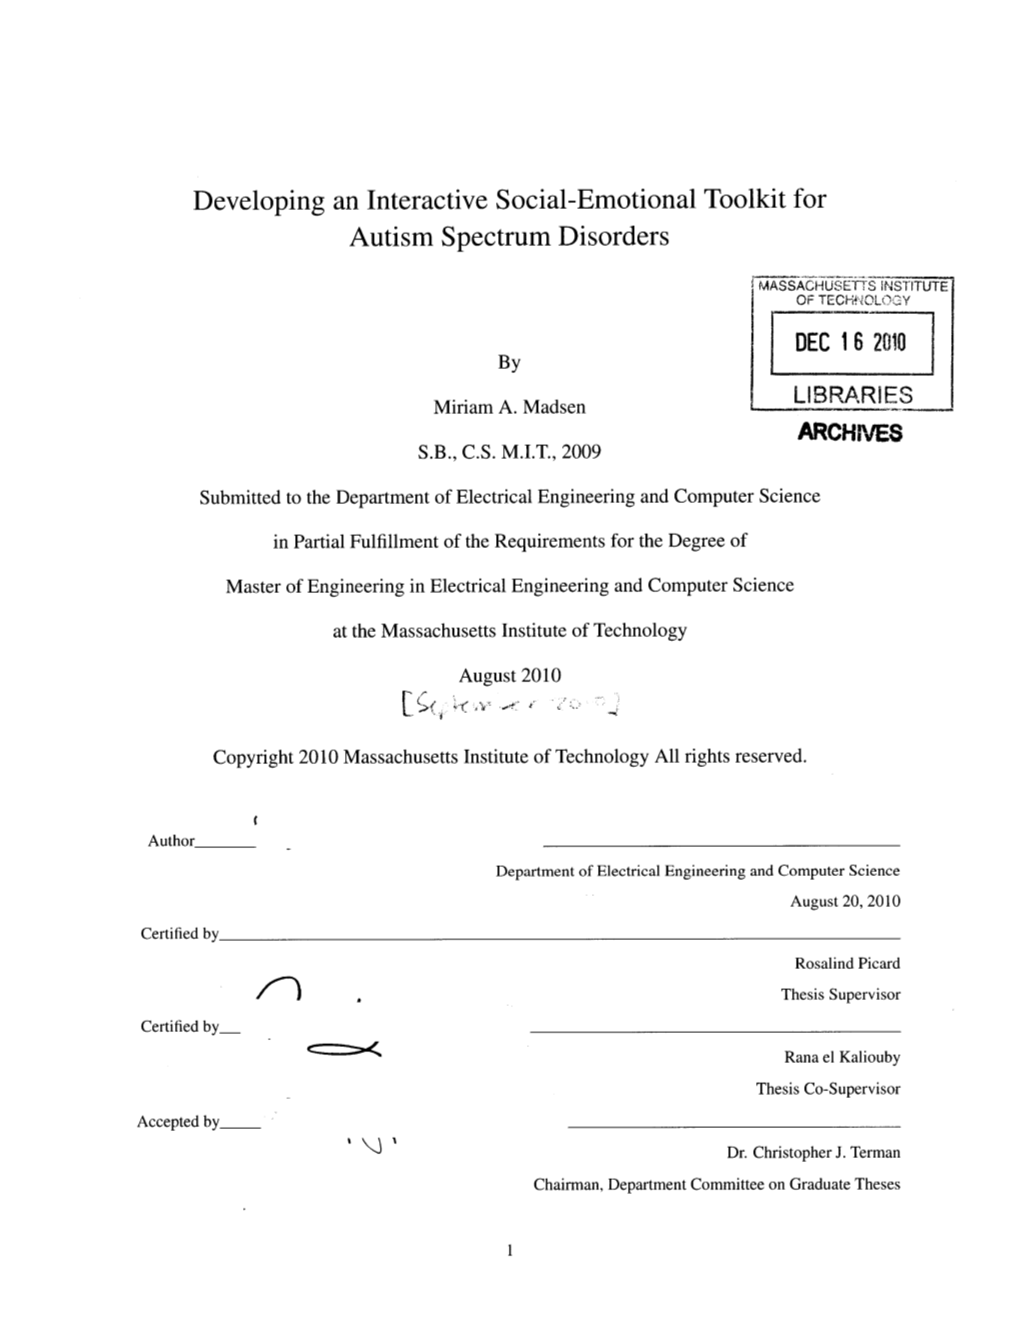 Developing an Interactive Social-Emotional Toolkit for Autism Spectrum Disorders